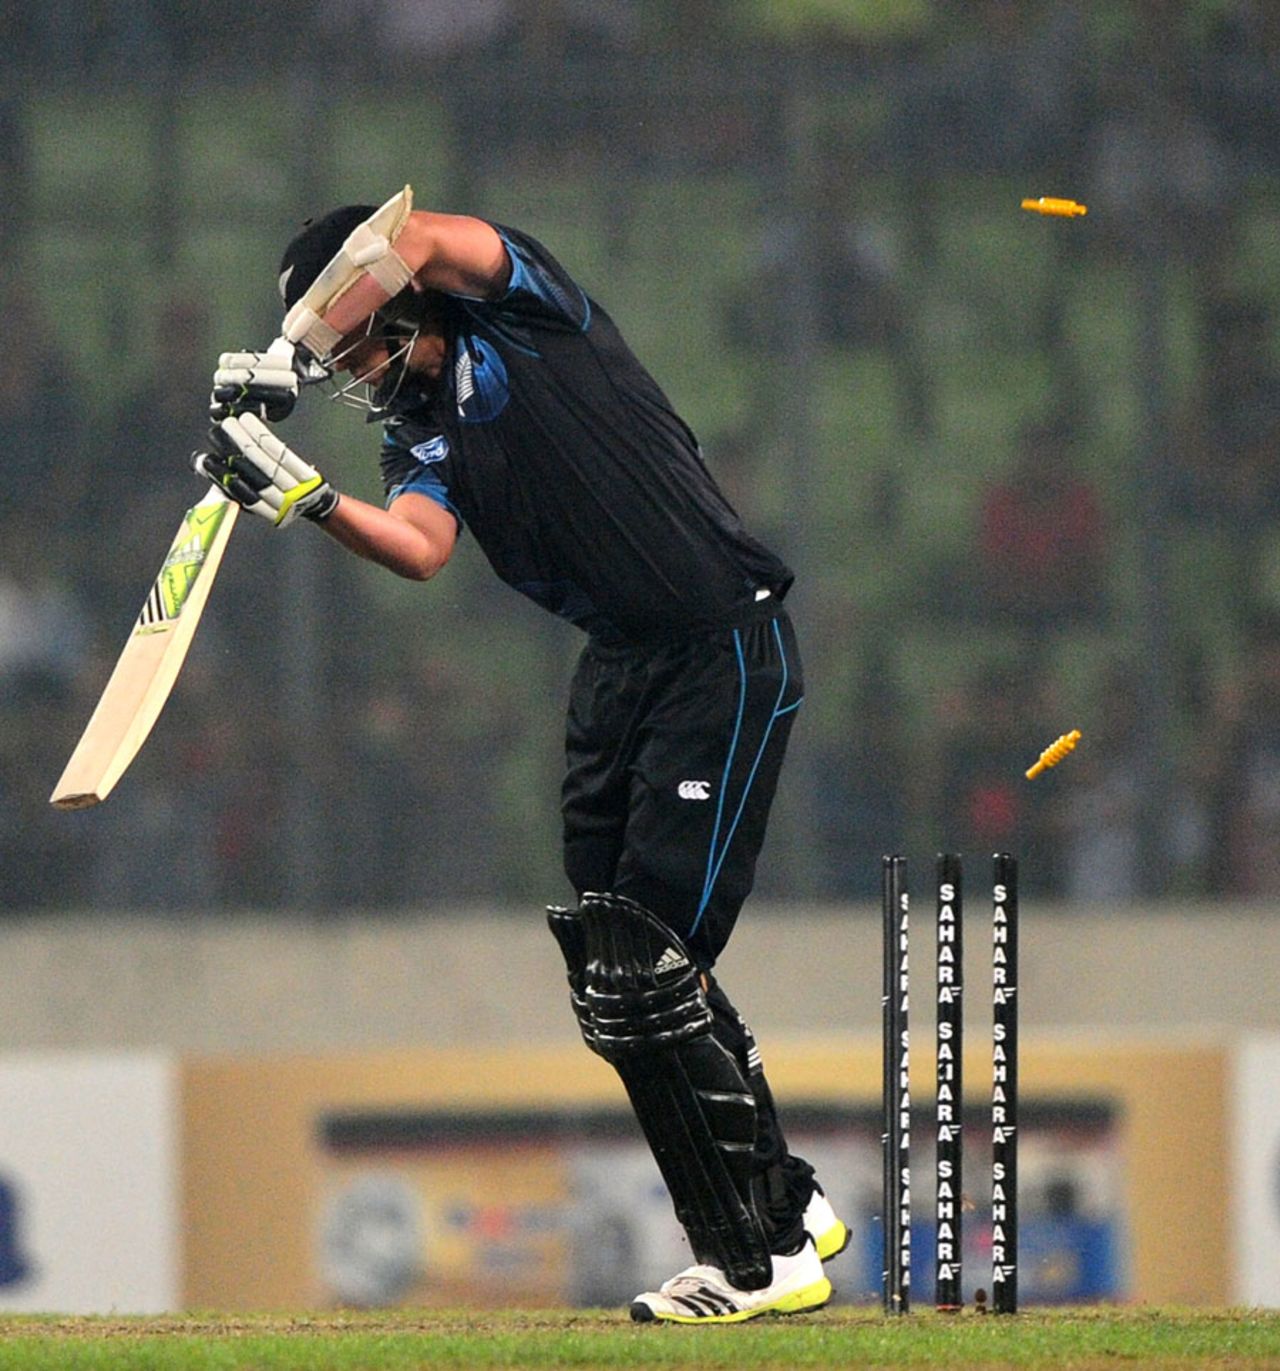 Tim Southee was the last man to be dismissed, bowled by Mortaza for a duck, Bangladesh v New Zealand, 2nd ODI, Mirpur, October 31, 2013